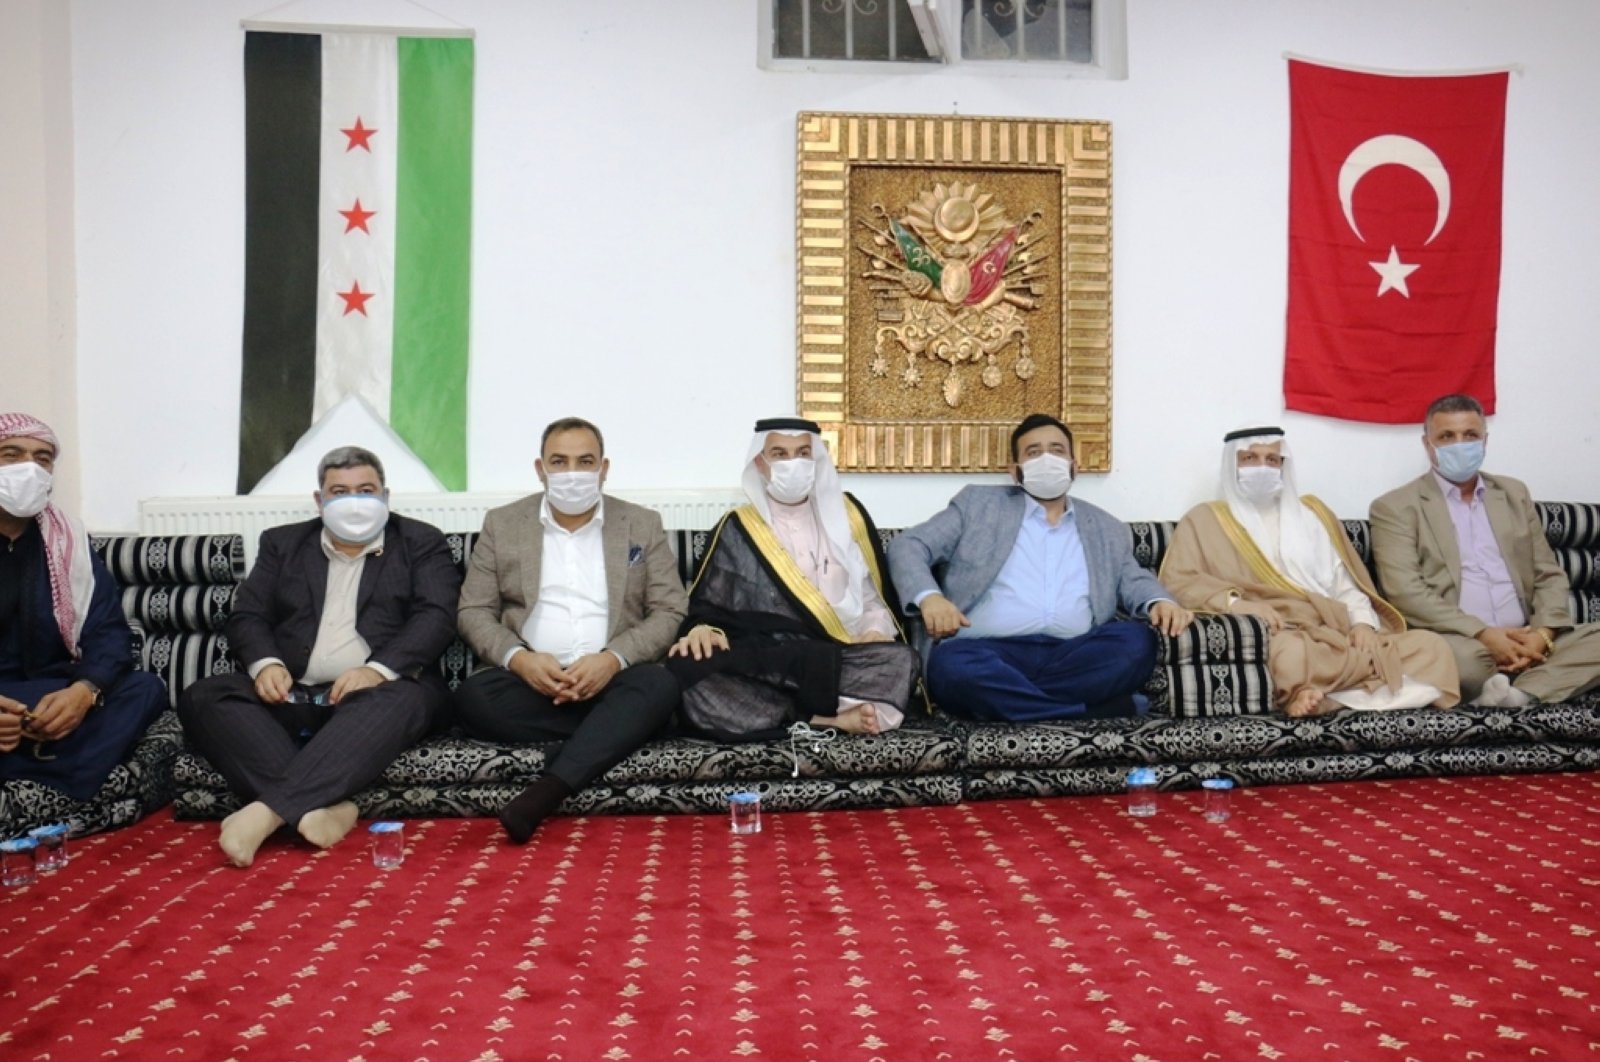 Syrian tribal leaders sit in a meeting organized to express support for Azerbaijan while condemning Armenia's cooperation with YPG/PKK, Oct.19, 2020. (IHA)